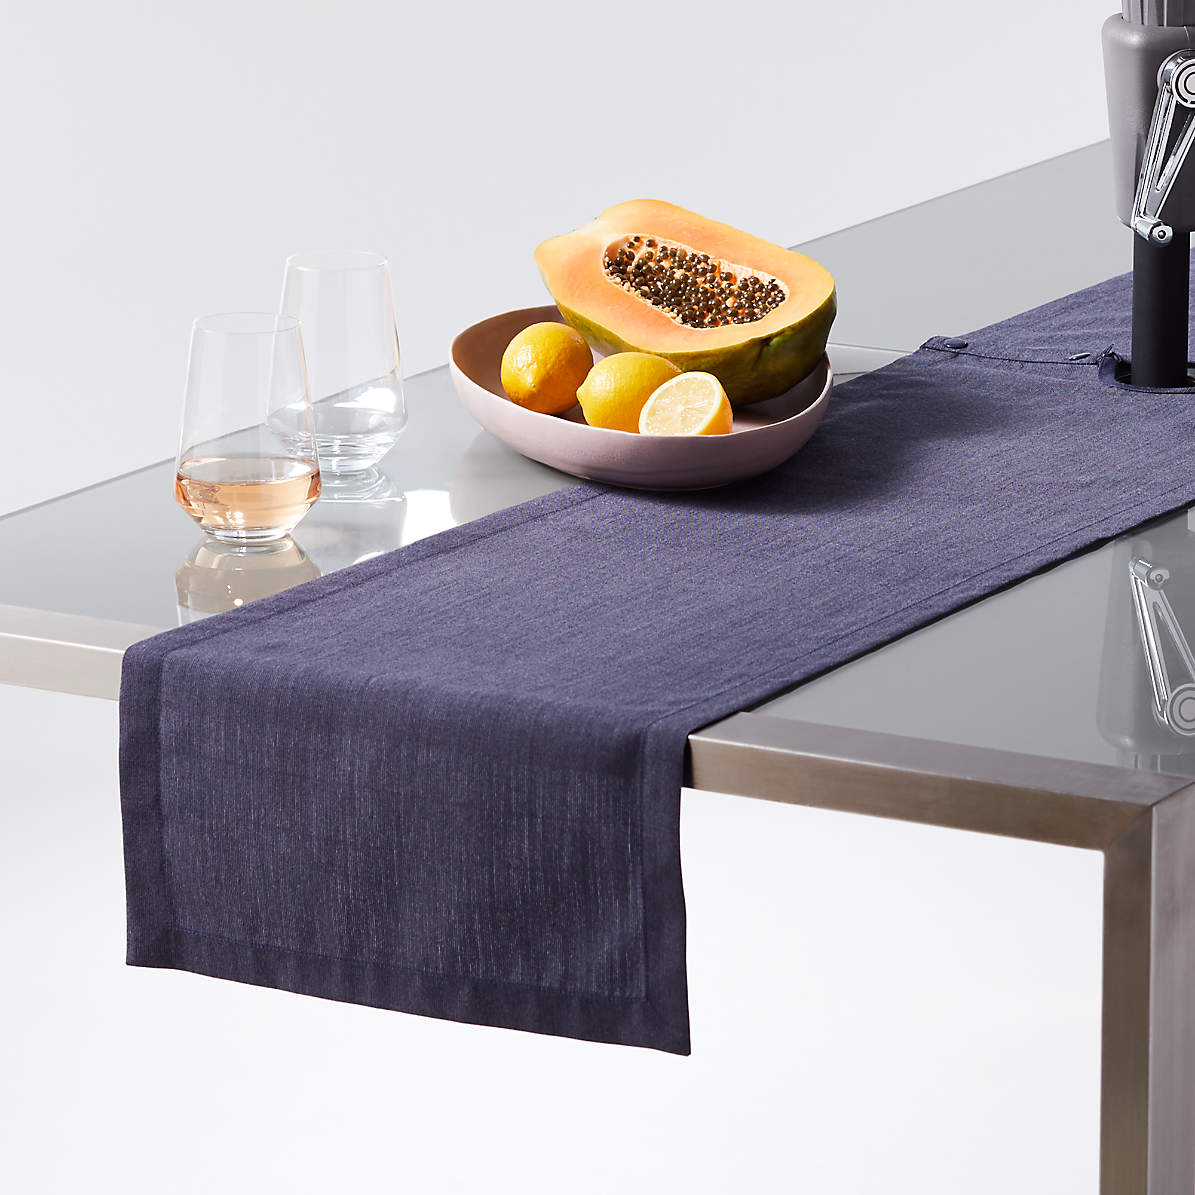 navy table runners